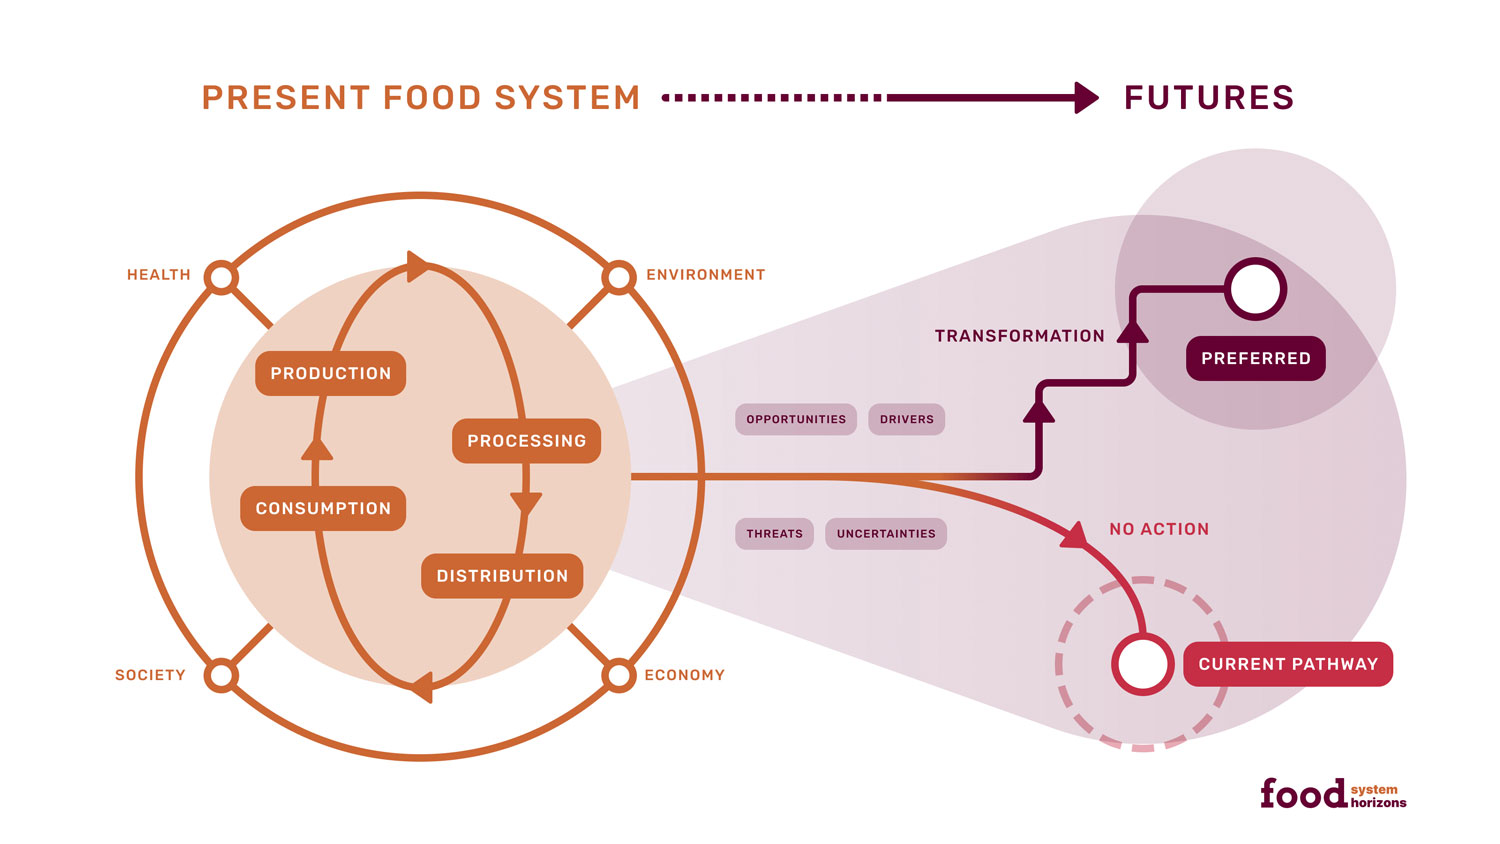 The left side of the food system futures figure is a simplified representation of the present food system, comprising four components of the food system that include production, processing, distribution, and consumption. The components sit within a circle that indicates that these impact each other. The food system produces outcomes for individual health, the environment, the economy, and society. These outcomes are shown in a concentric circle around the food system components, indicating their interrelationship with the components and their impact on each other.  In the middle of the food system futures figure, there is a single pathway emerging from the present food system towards food system futures. This pathway is impacted by opportunities, drivers, threats, and uncertainties. Towards the right side of the figure, this pathway diverges to two different pathways. One pathway labelled the current pathway indicates no action is taken and continues downward to the bottom of the figure. The second pathway labelled preferred goes upwards in steps, which are labelled transformation, indicating that we can have a preferred food system future through transformation. All of the pathways occur within a cone of colour, which indicates that there are many different pathways, and thus many different food system futures.]